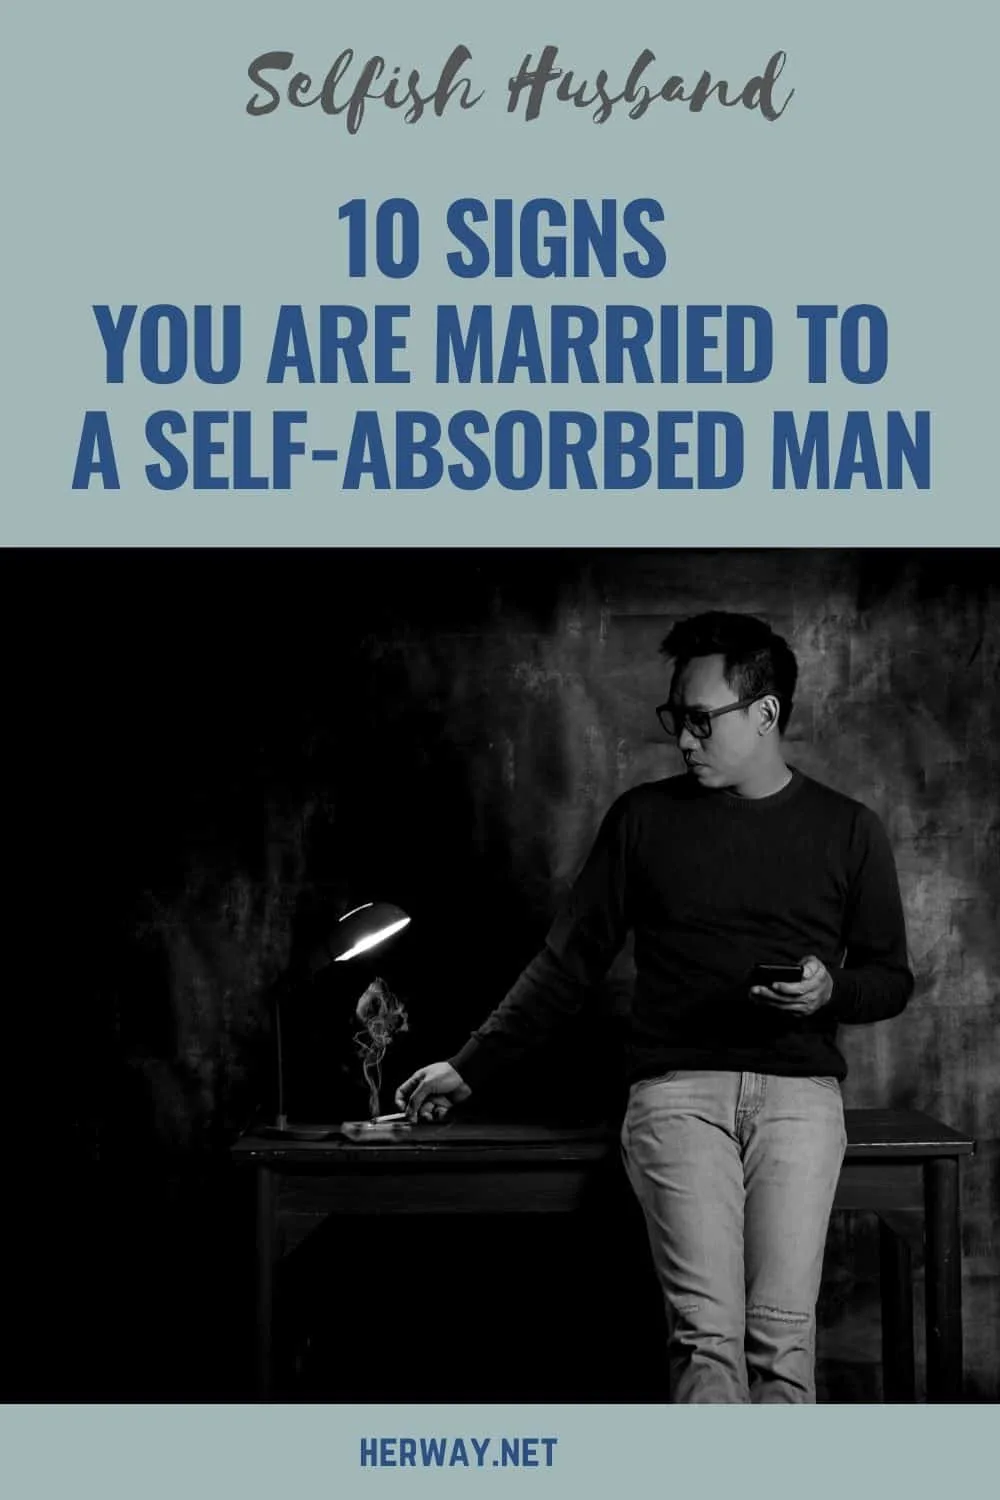 How can you tell if a guy is self-centered?